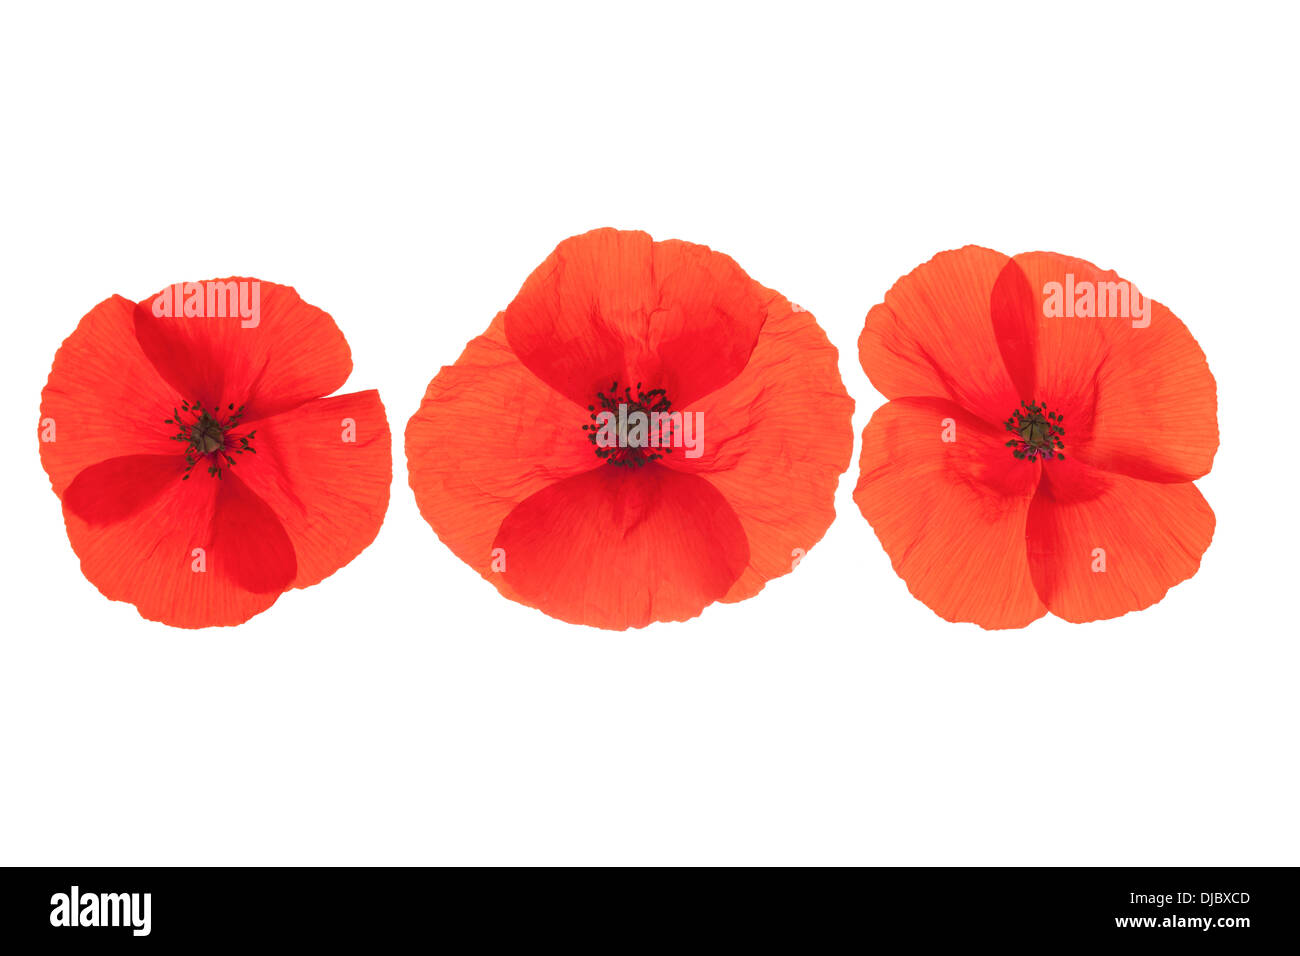 Three Red Corn Poppies Flowers arranged in a line isolated on white background with shallow depth of field. Stock Photo